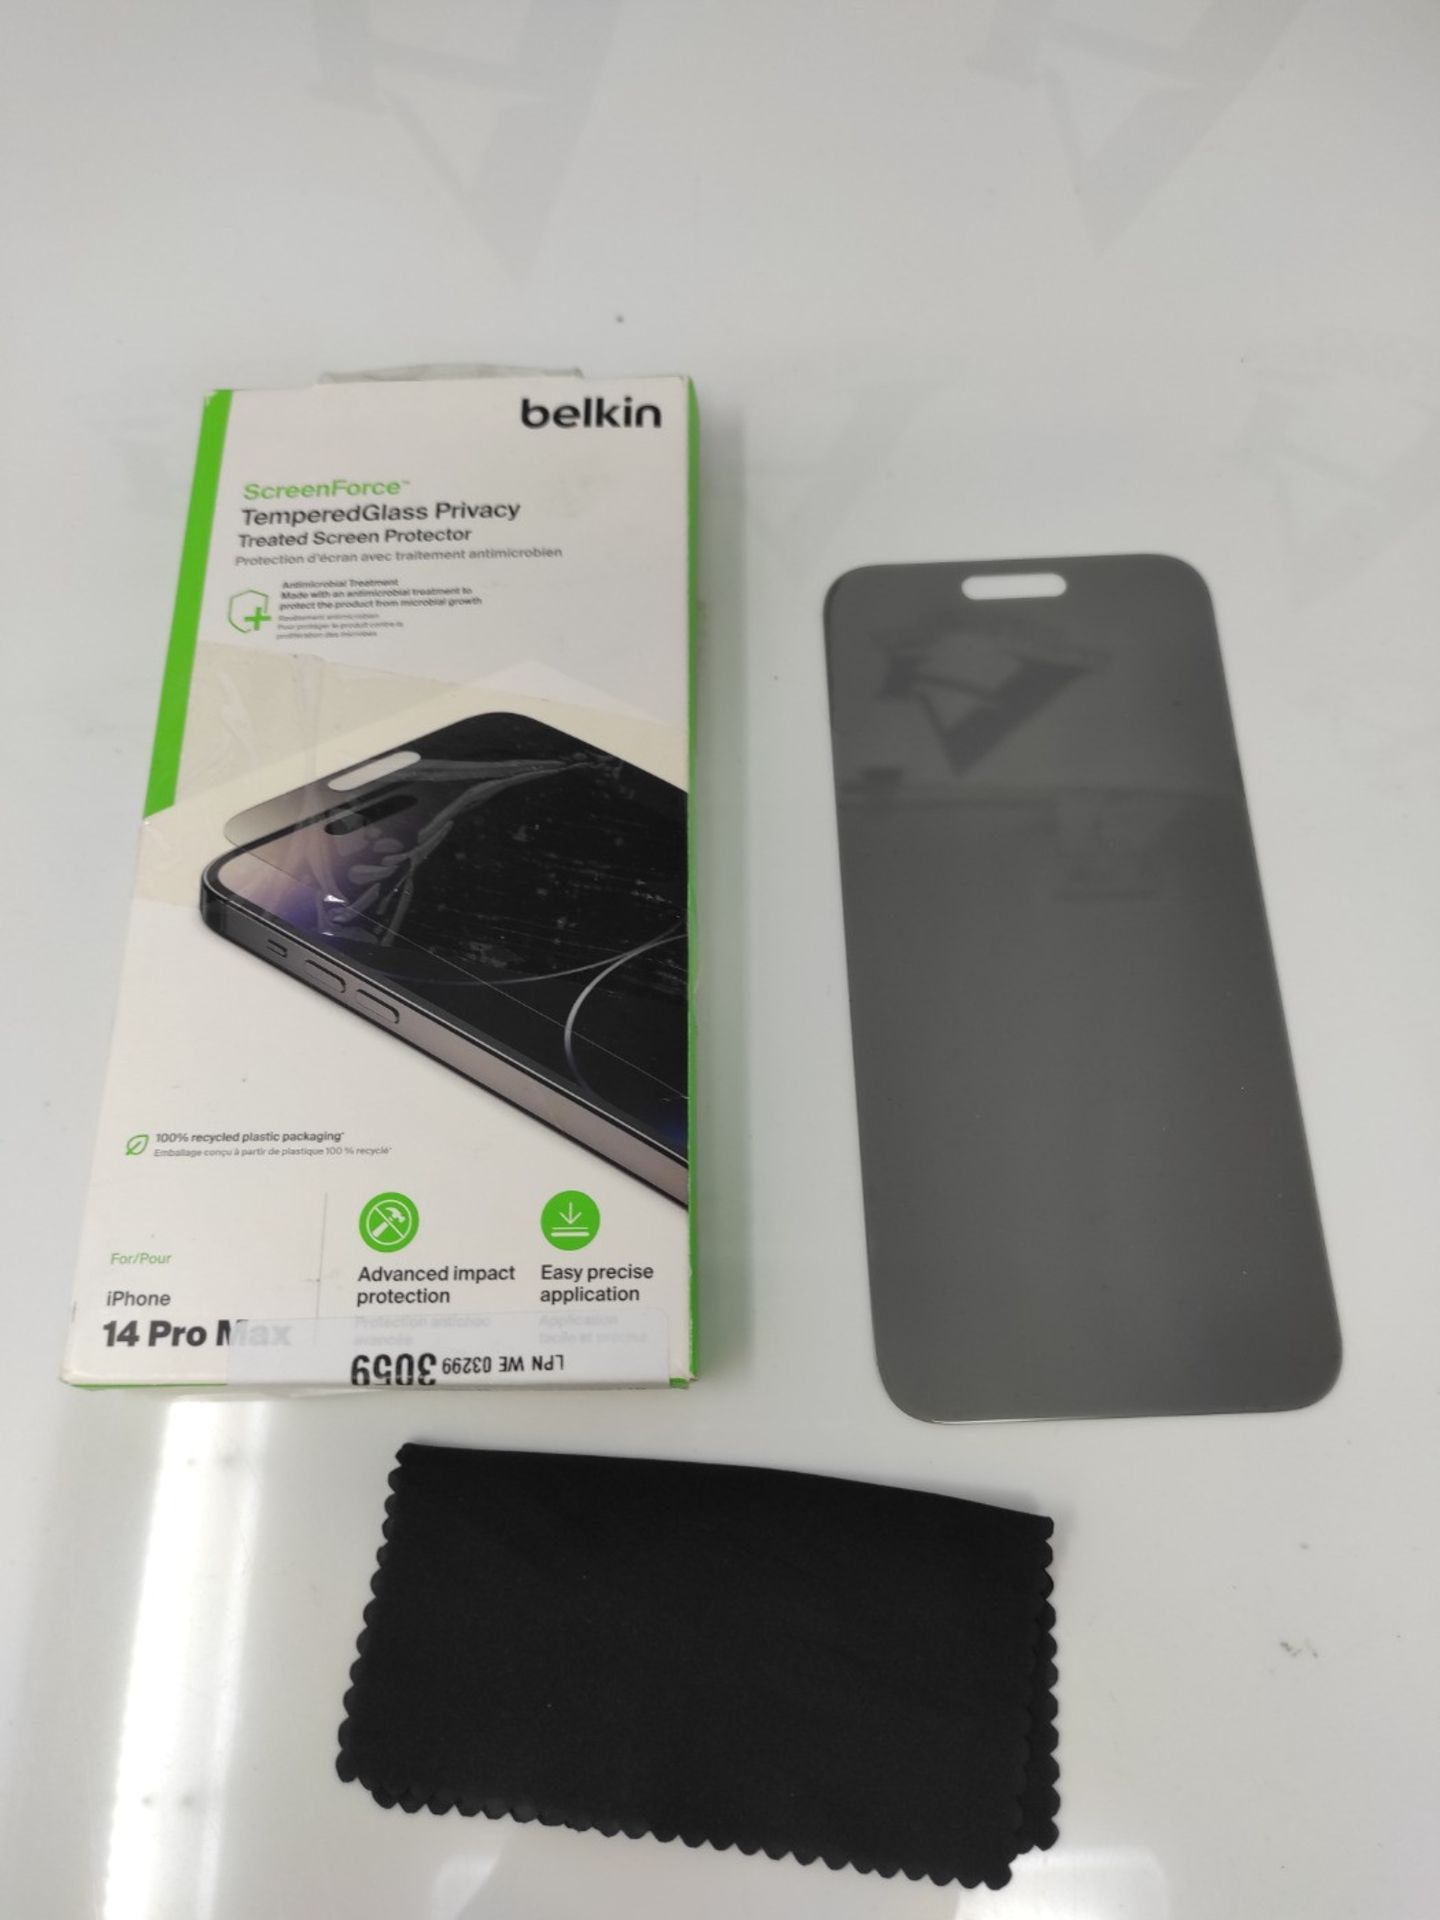 Belkin Privacy Tempered Glass iPhone 14 Pro Max screen protector, Treated Surface with - Image 2 of 2